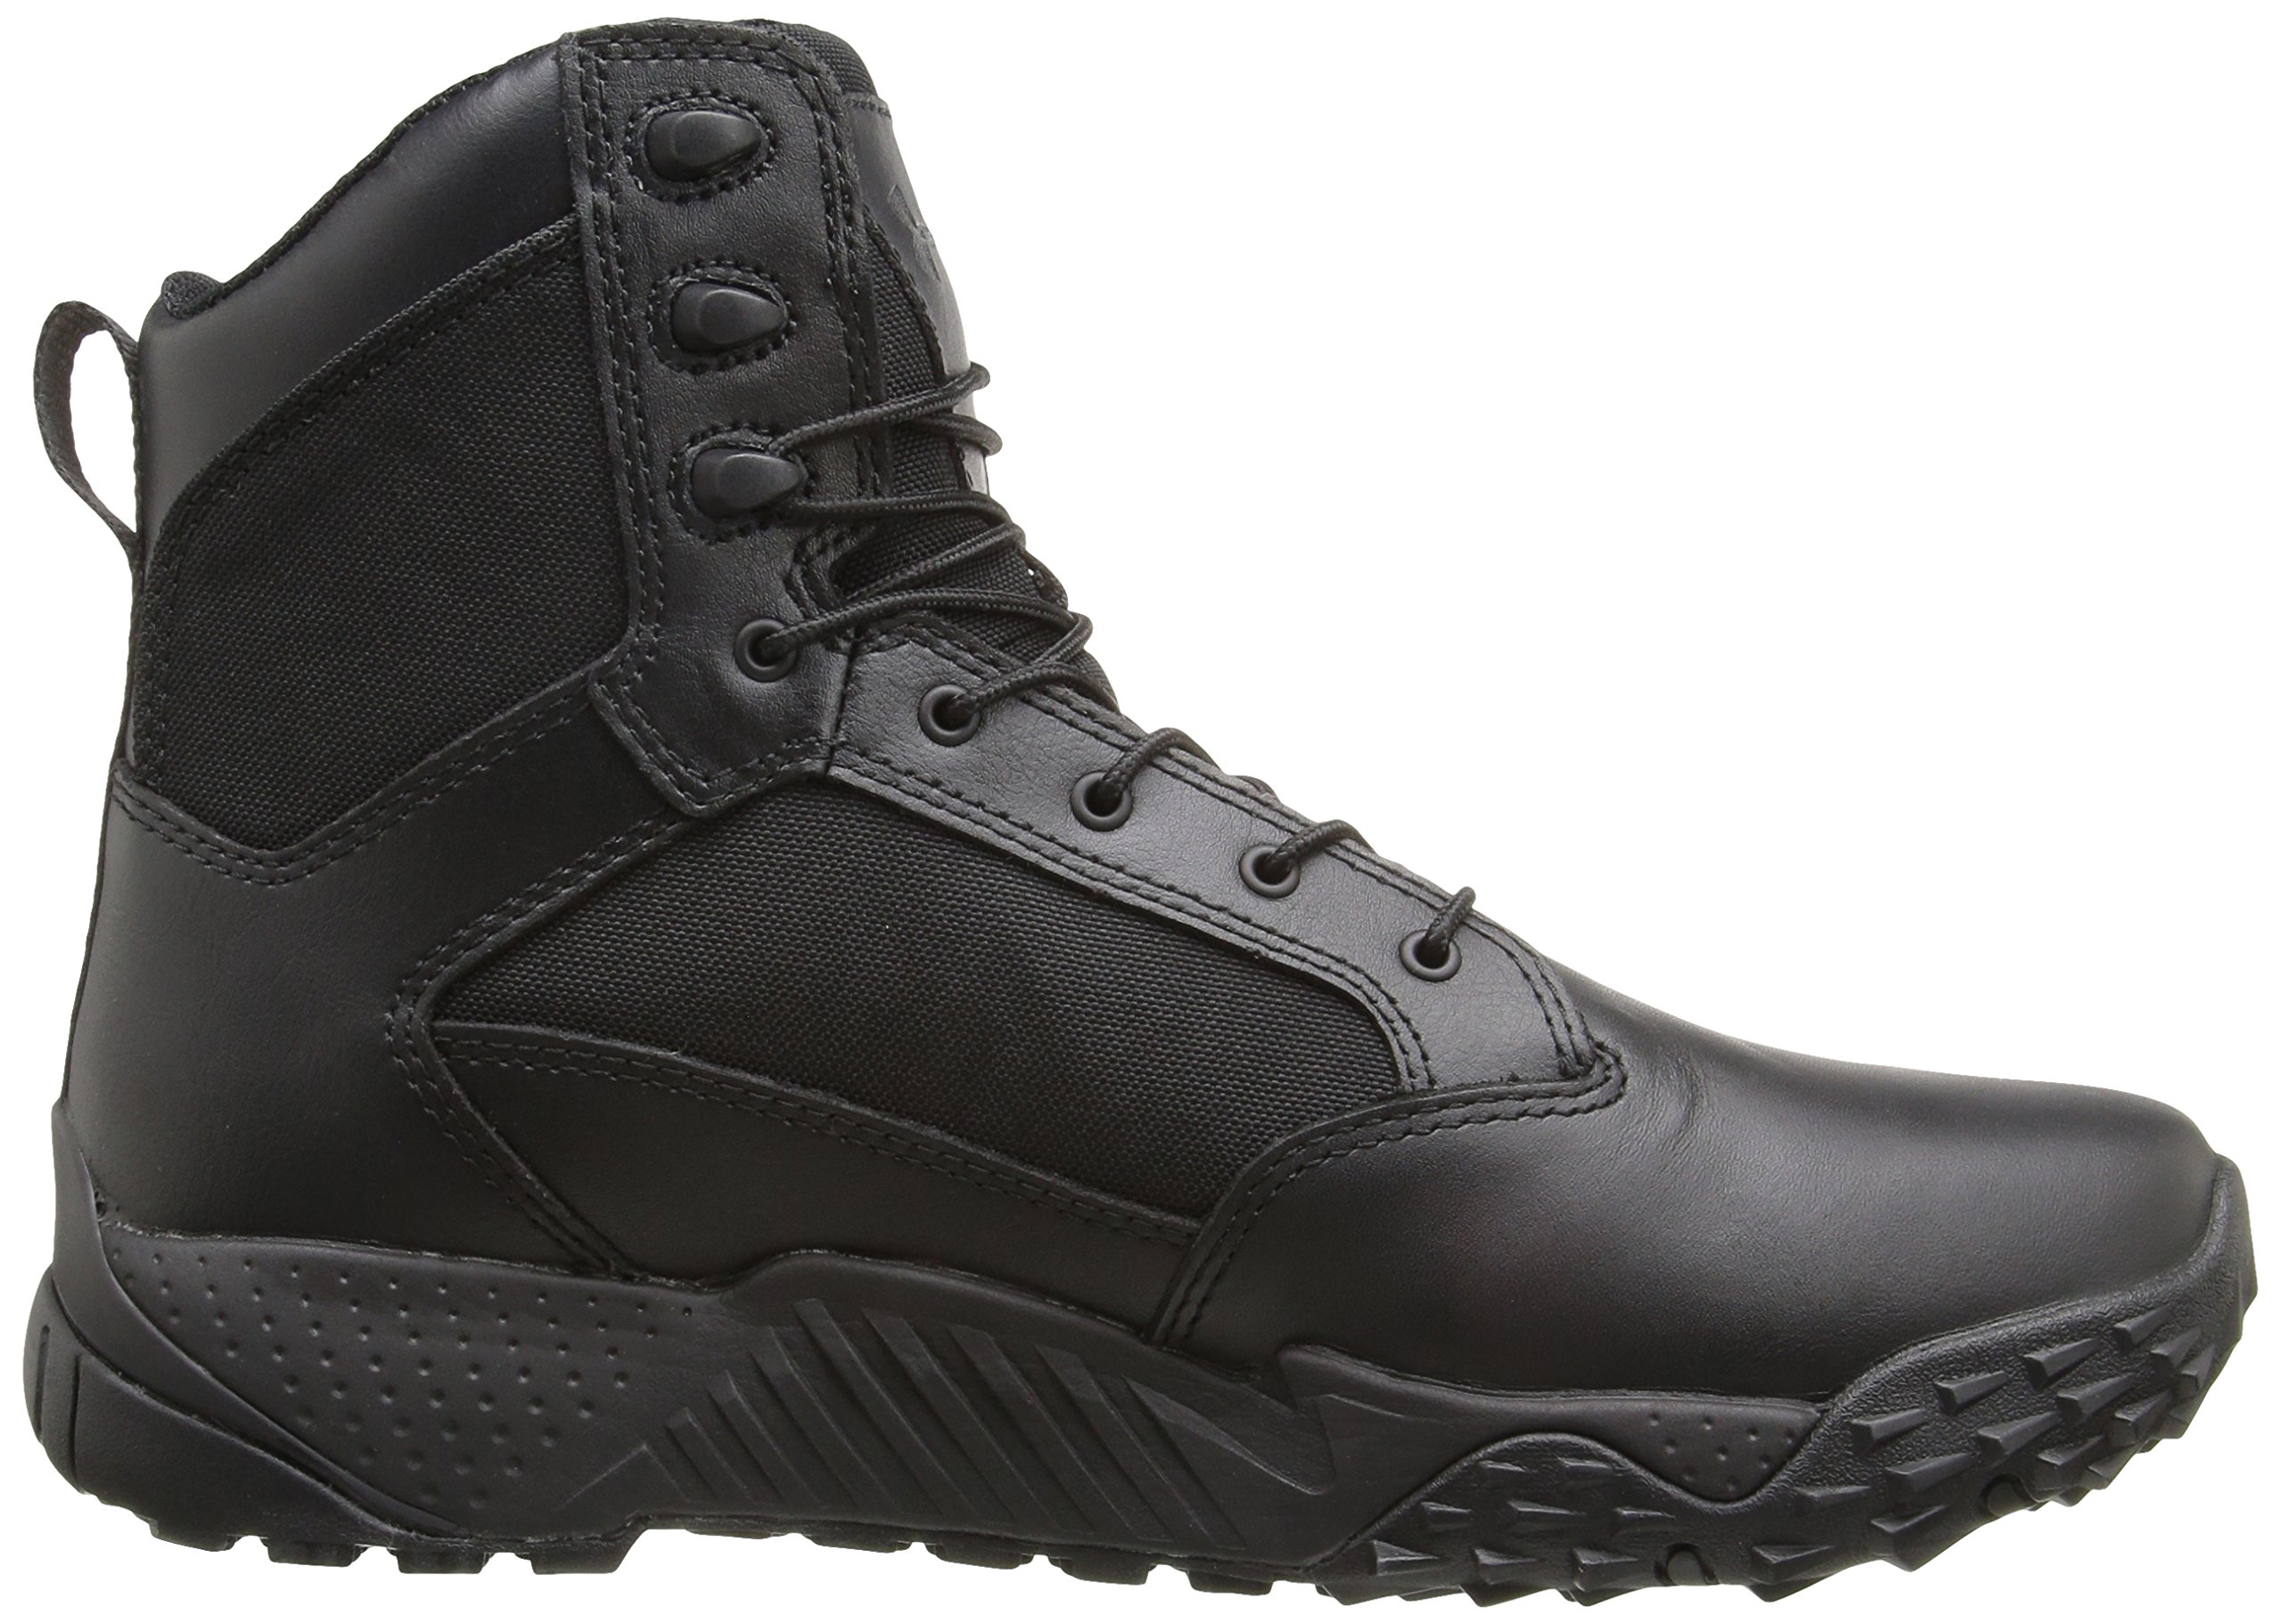 Under Armour Men's Stellar Military and Tactical Boot